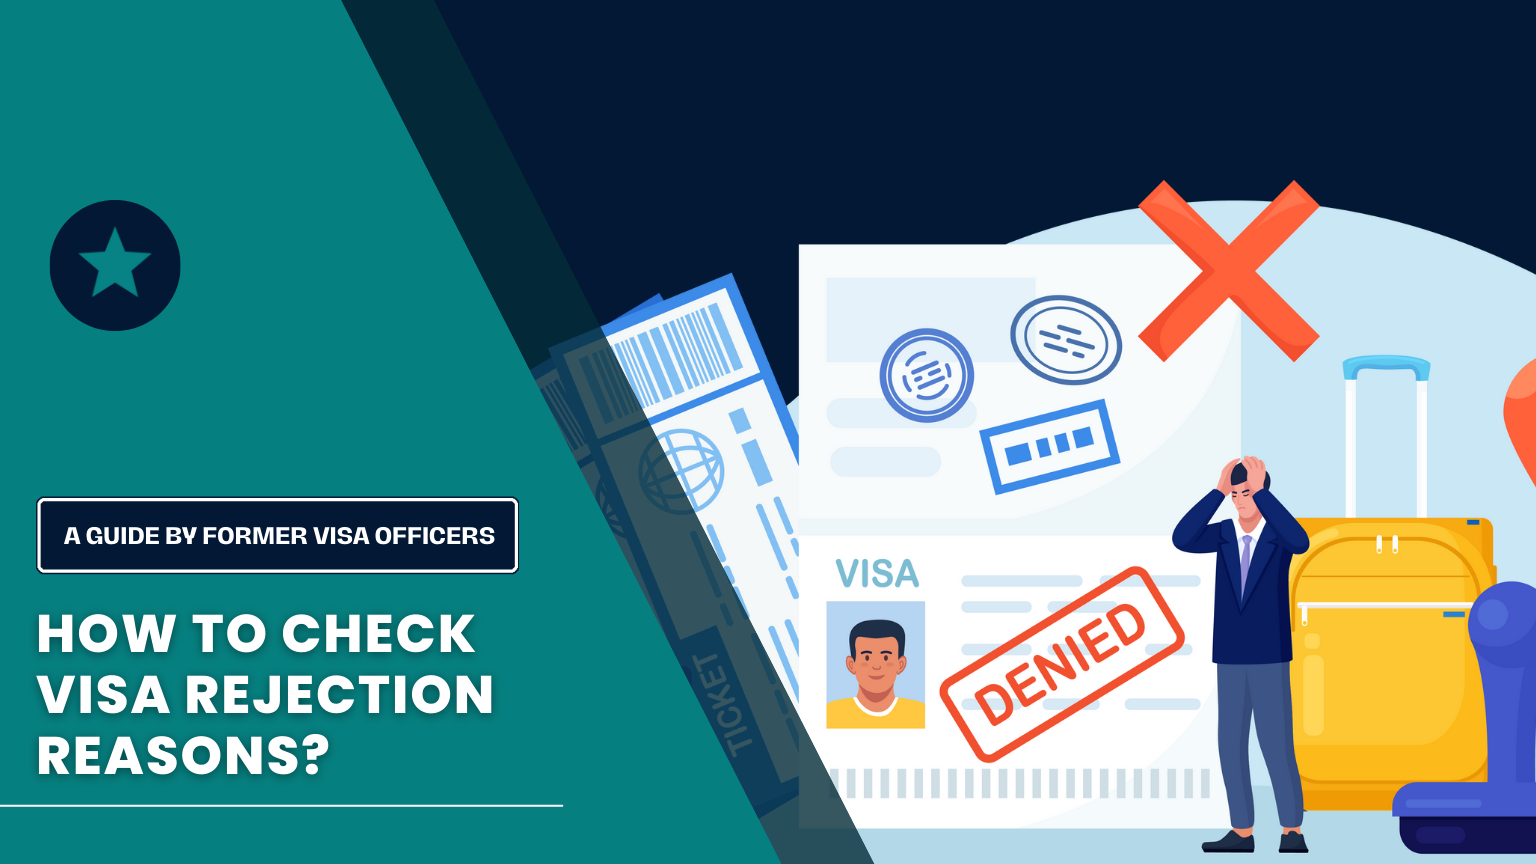 How to Check Visa Rejection Reasons